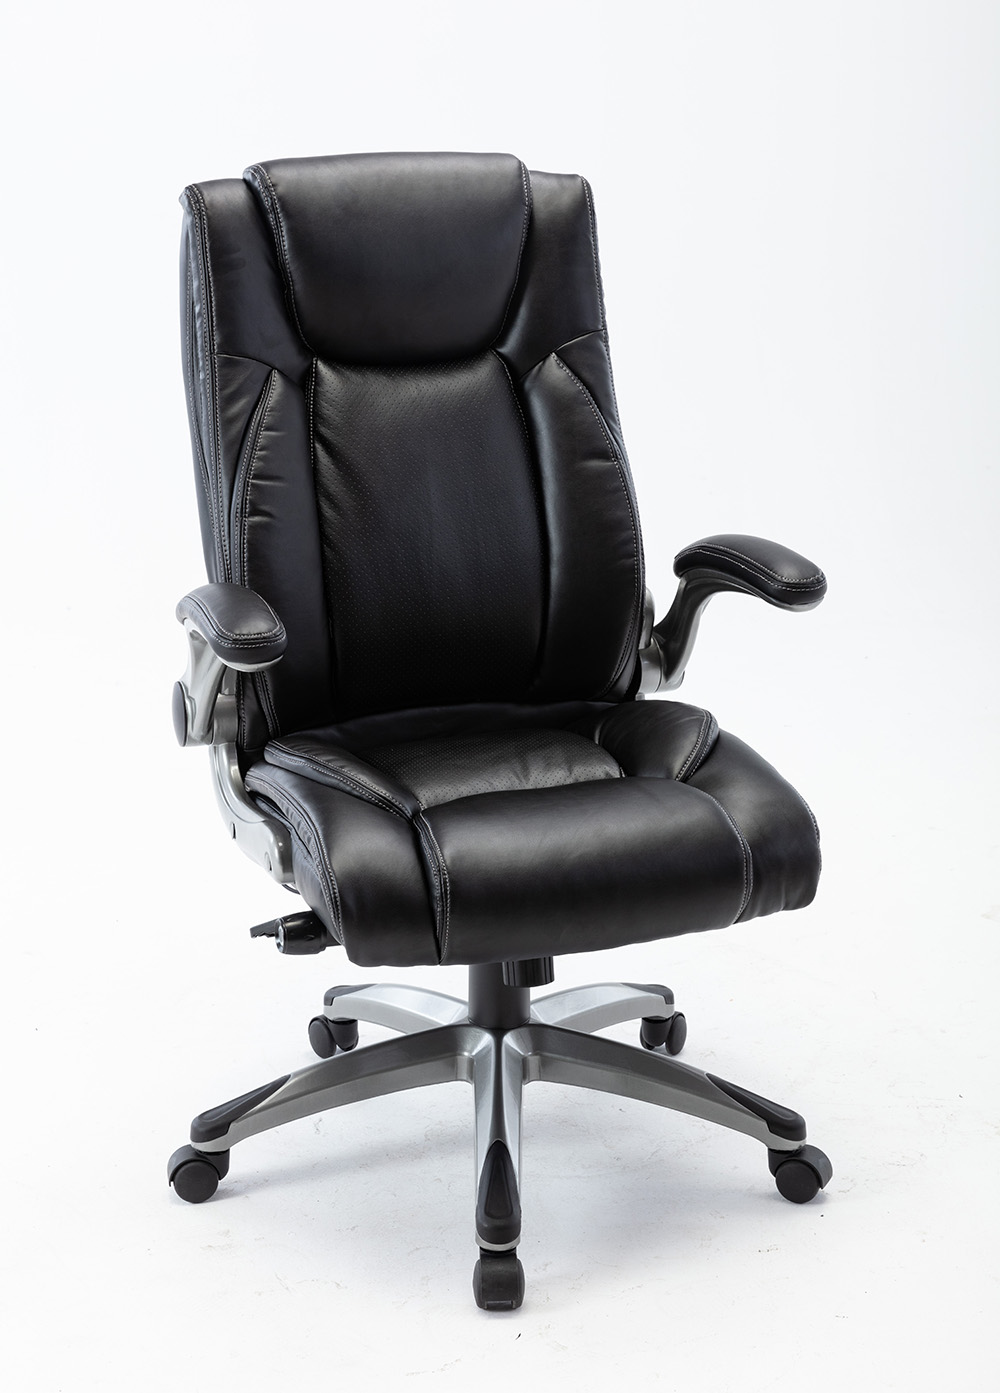 Home Office Leather Rotatable Chair Height Adjustable with Ergonomic High Backrest and Flip-up Arms - Black